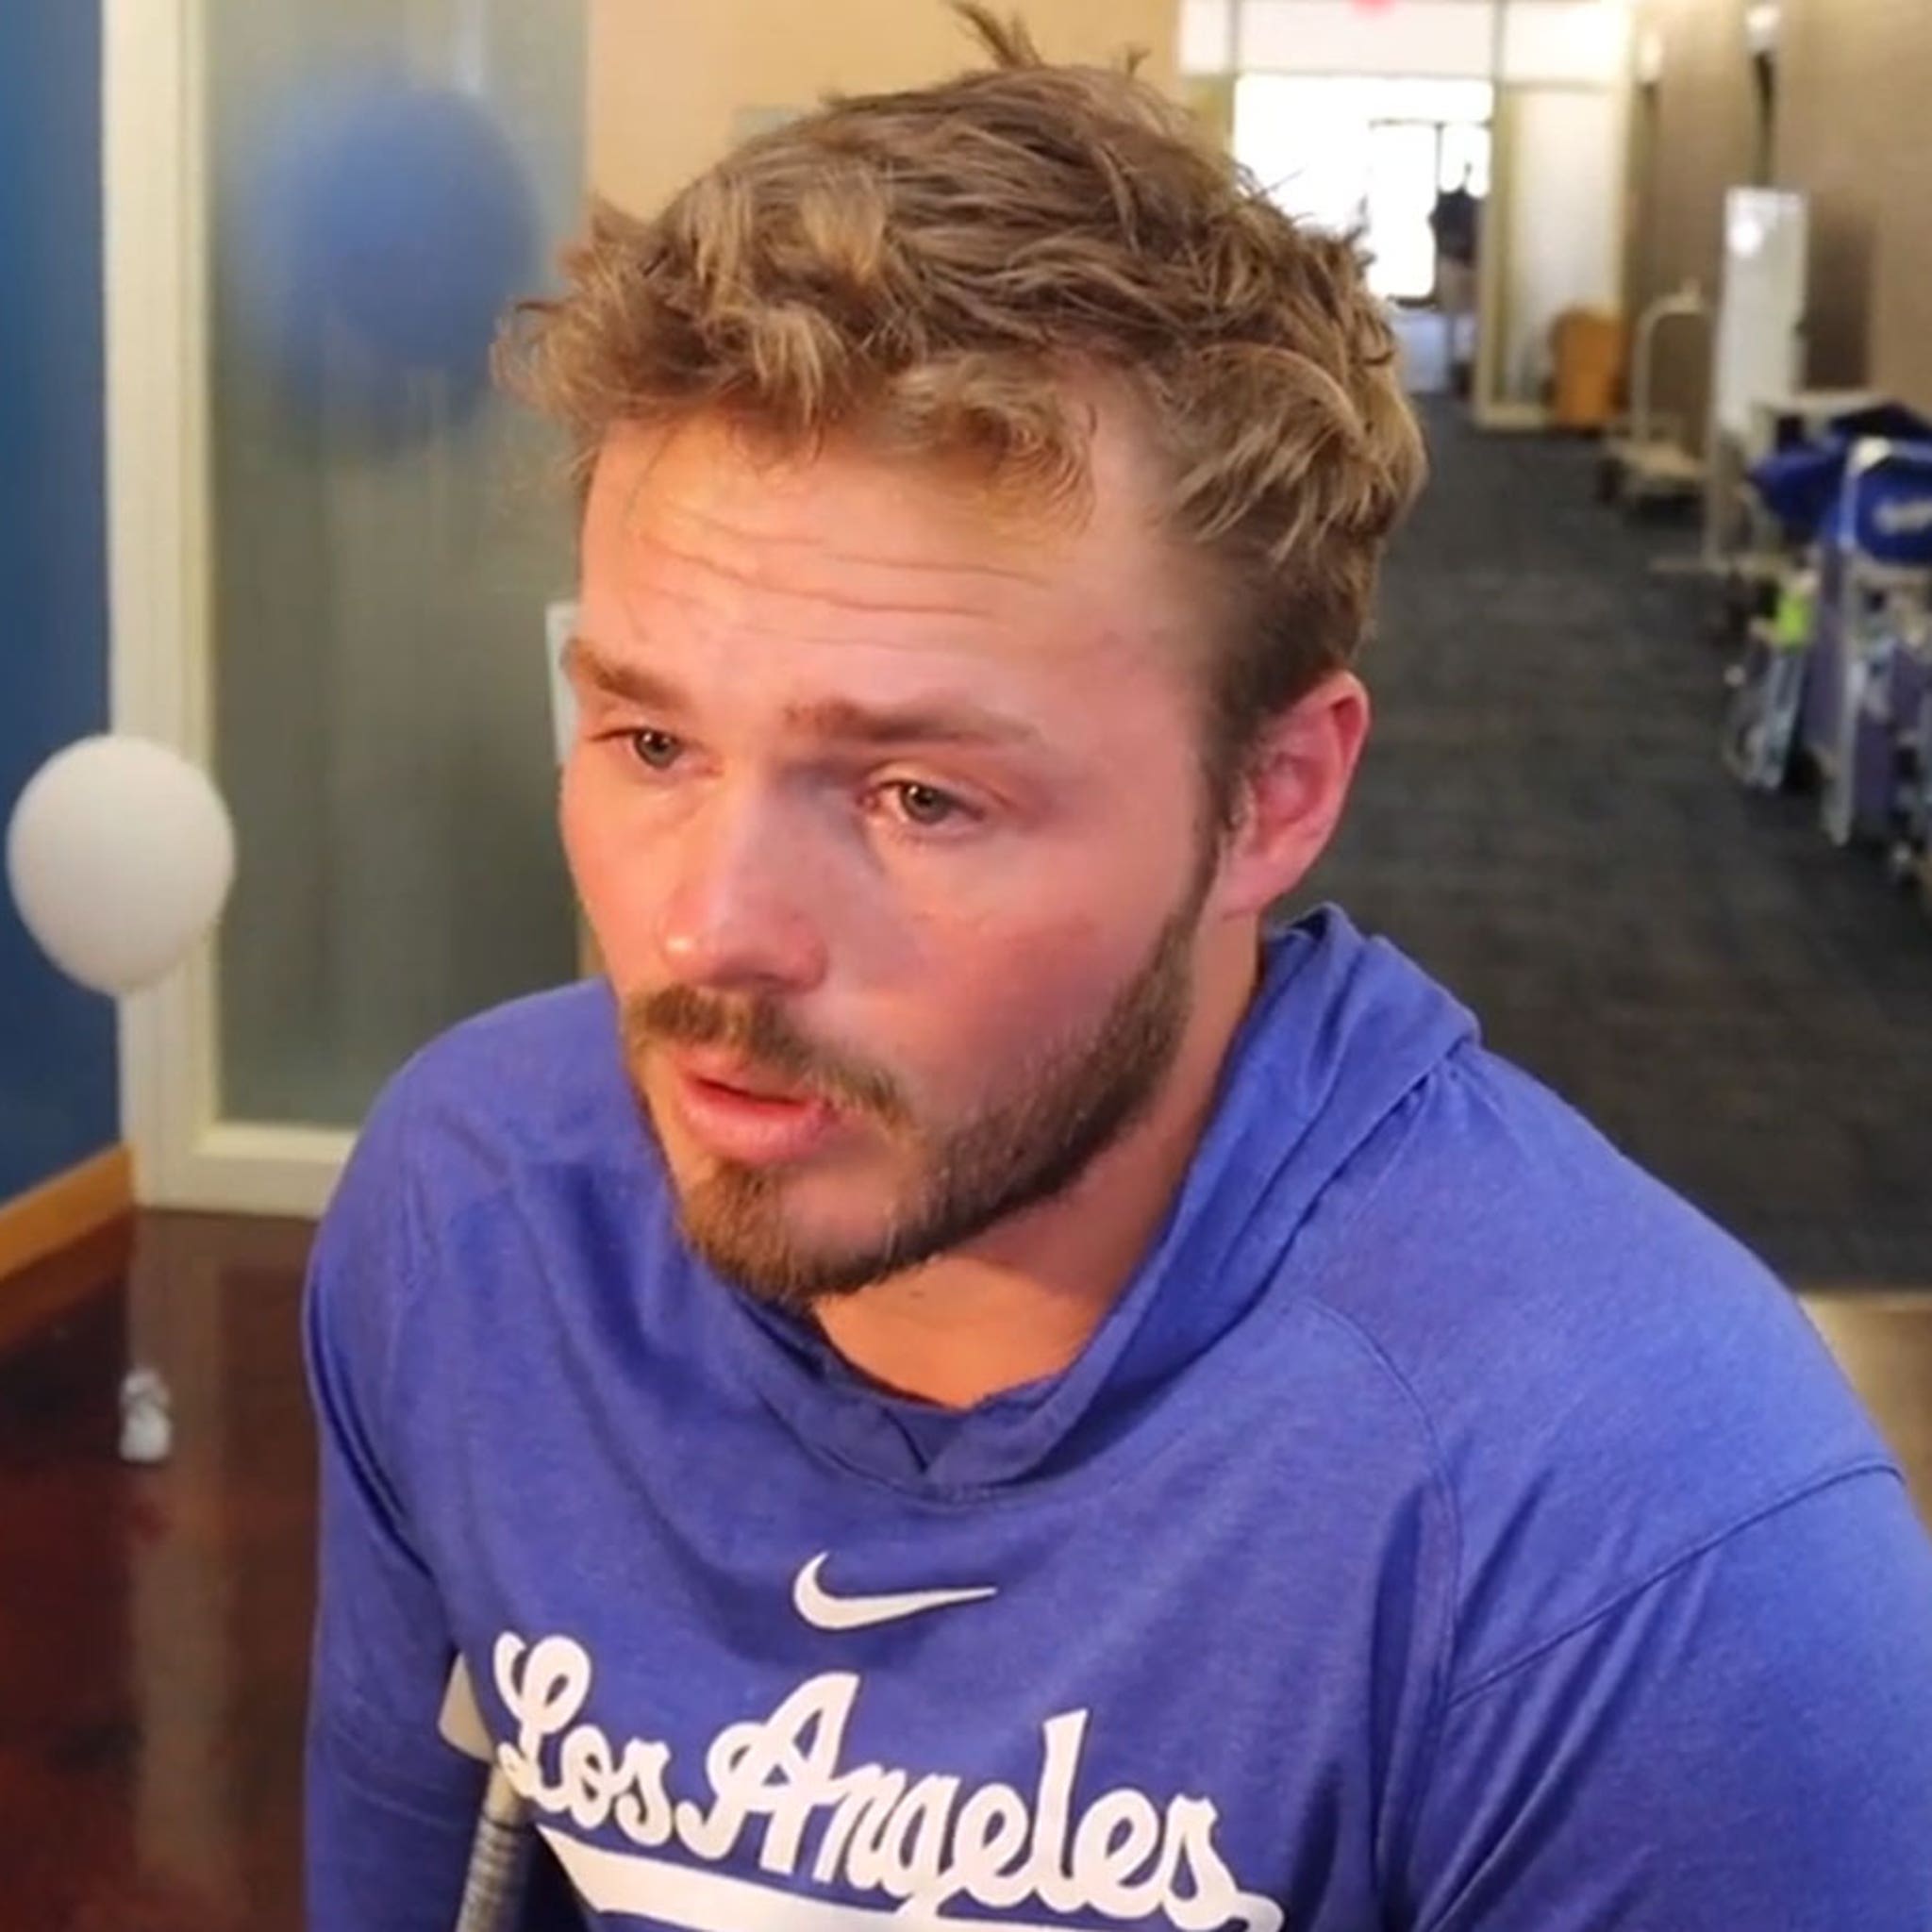 Dodgers' Gavin Lux out for the season with torn ACL – Orange